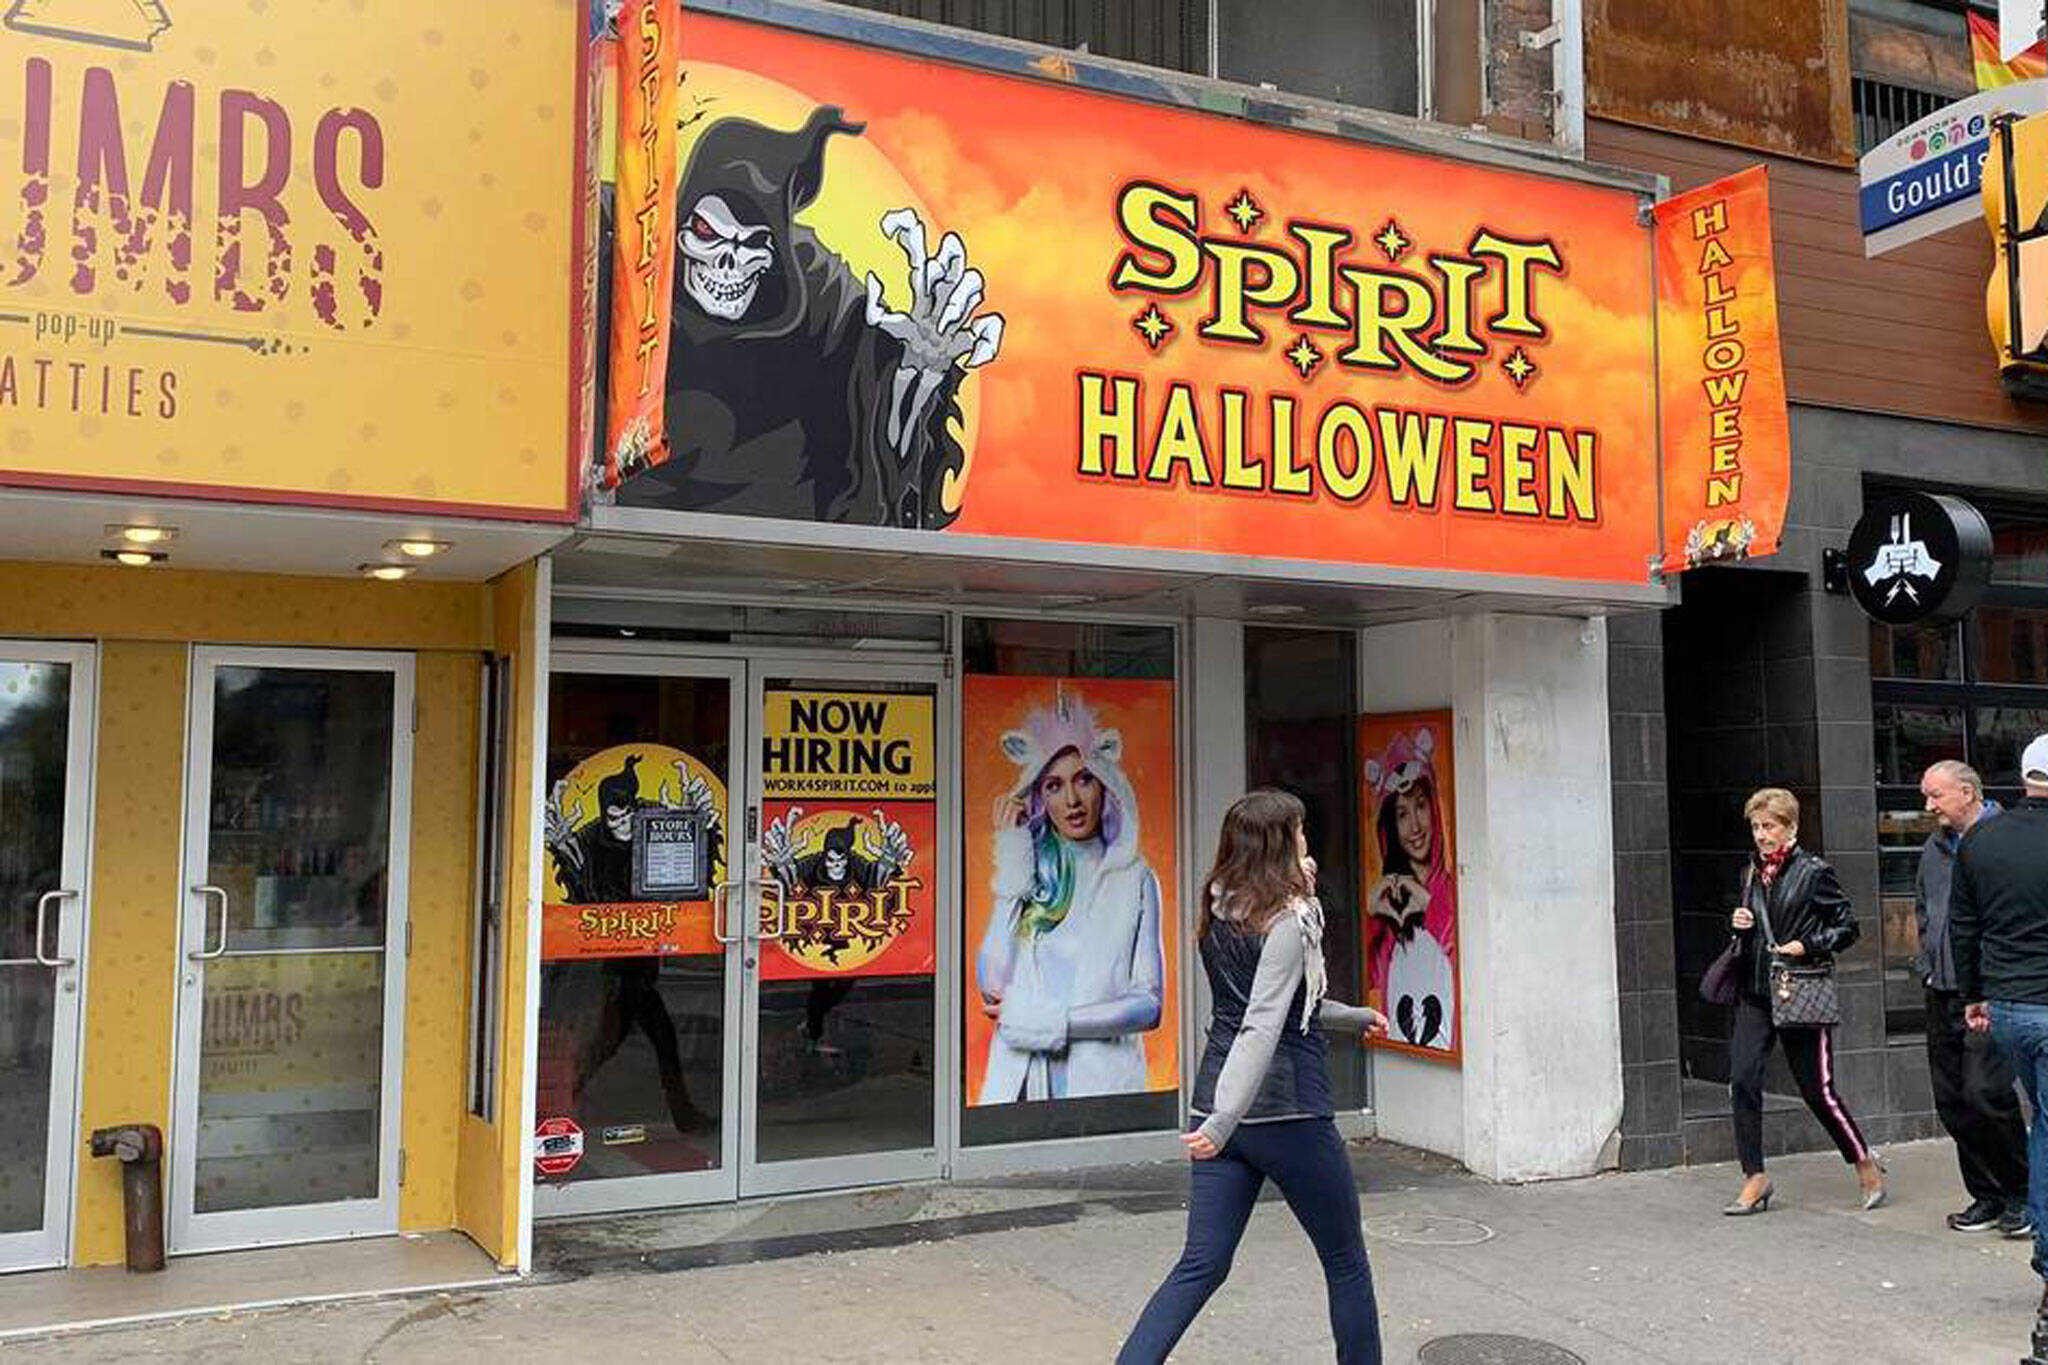 Spirit Halloween is back in Toronto this year and here are all of its